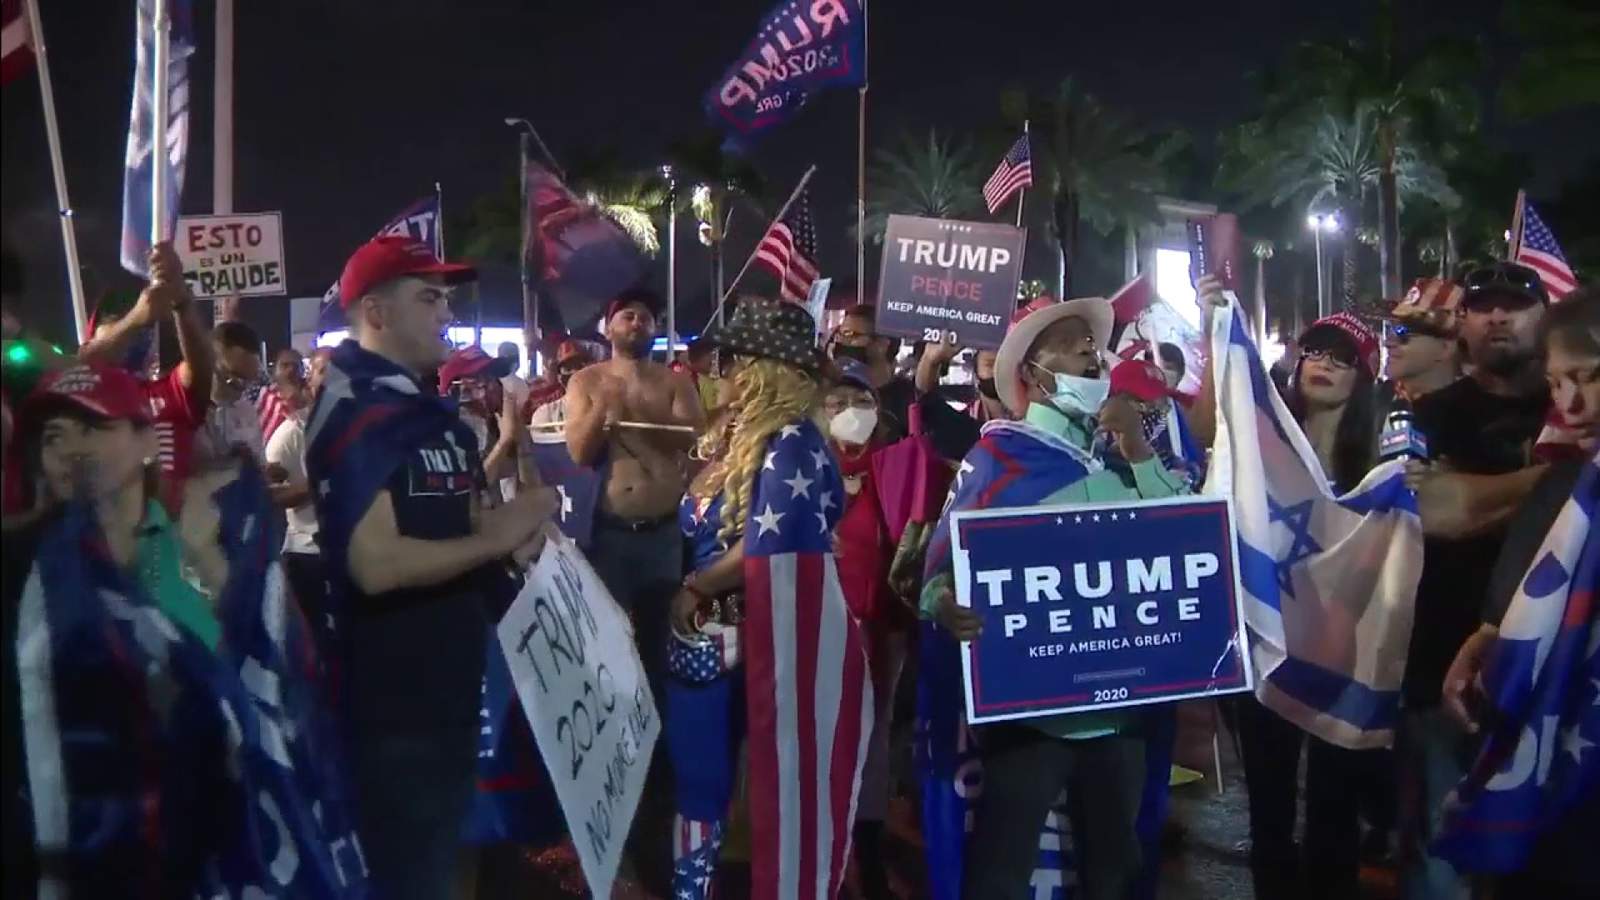 Trump supporters in Miami-Dade say reelection is being stolen from him